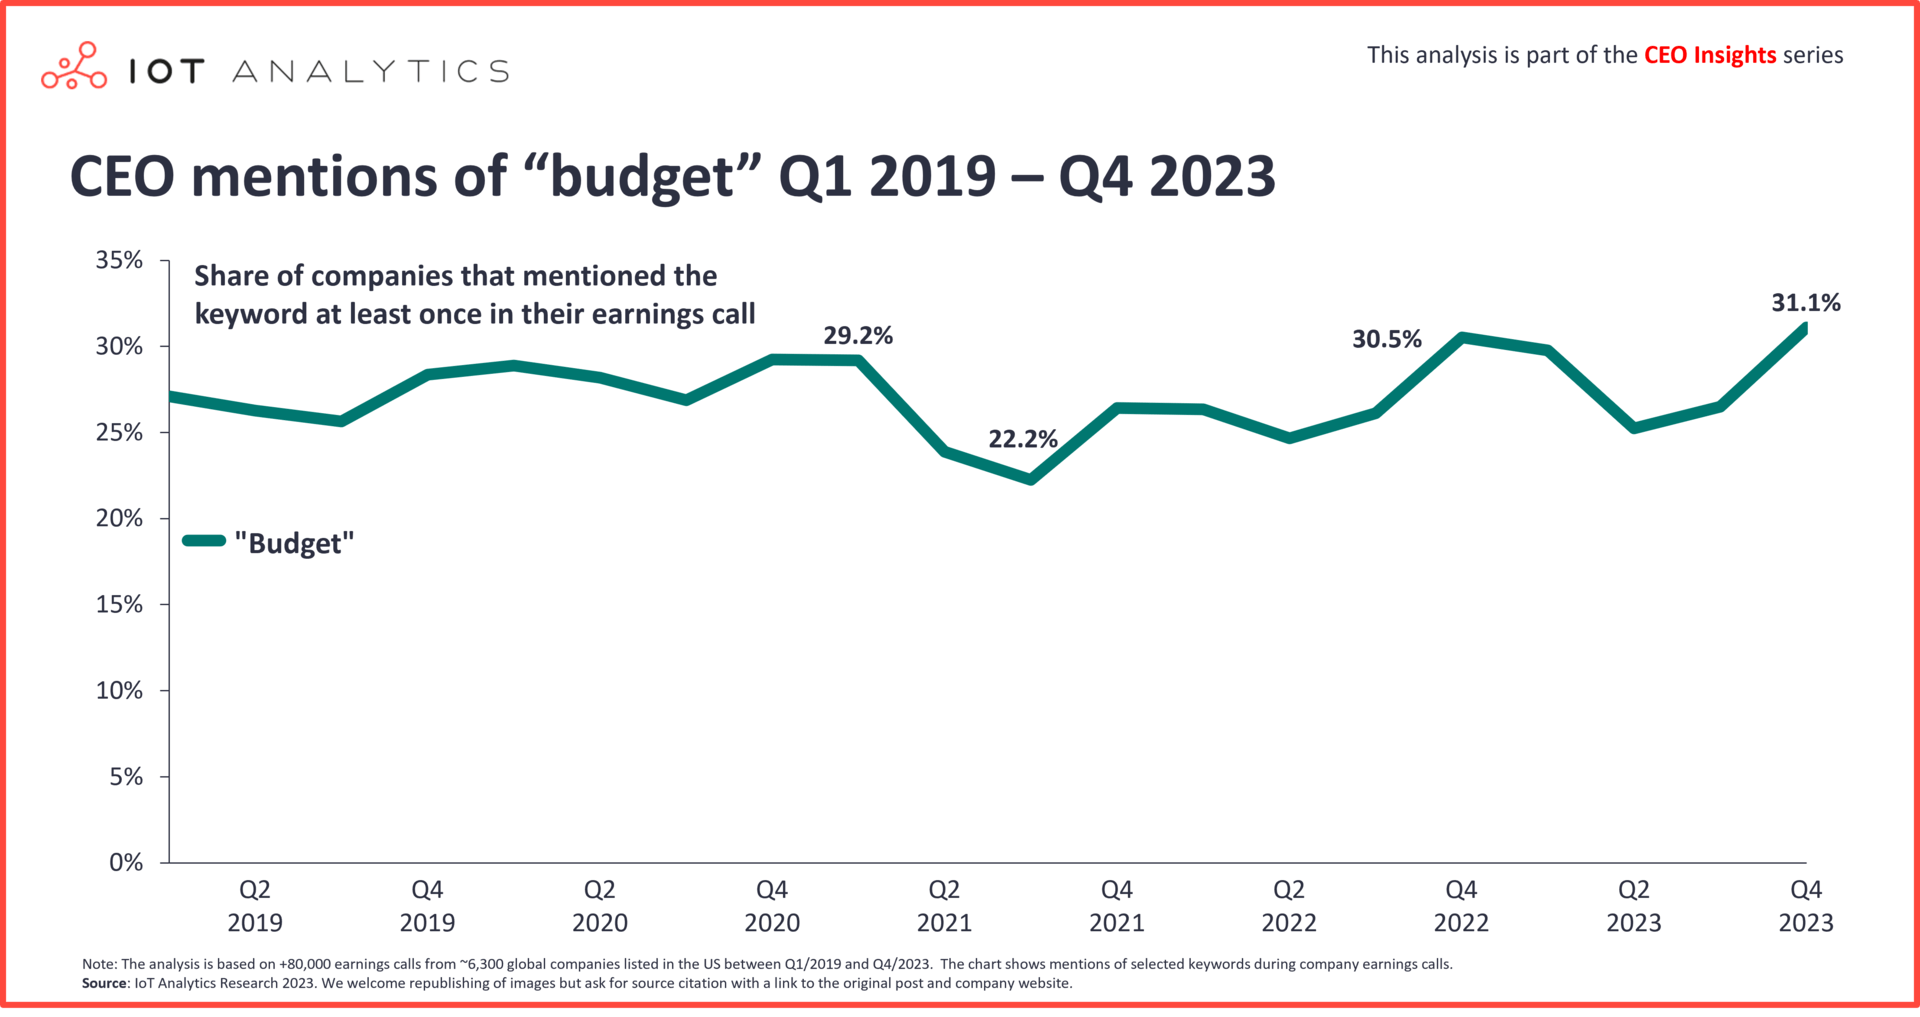 CEO mentions of budget and costs Q1 2019 - Q4 2023